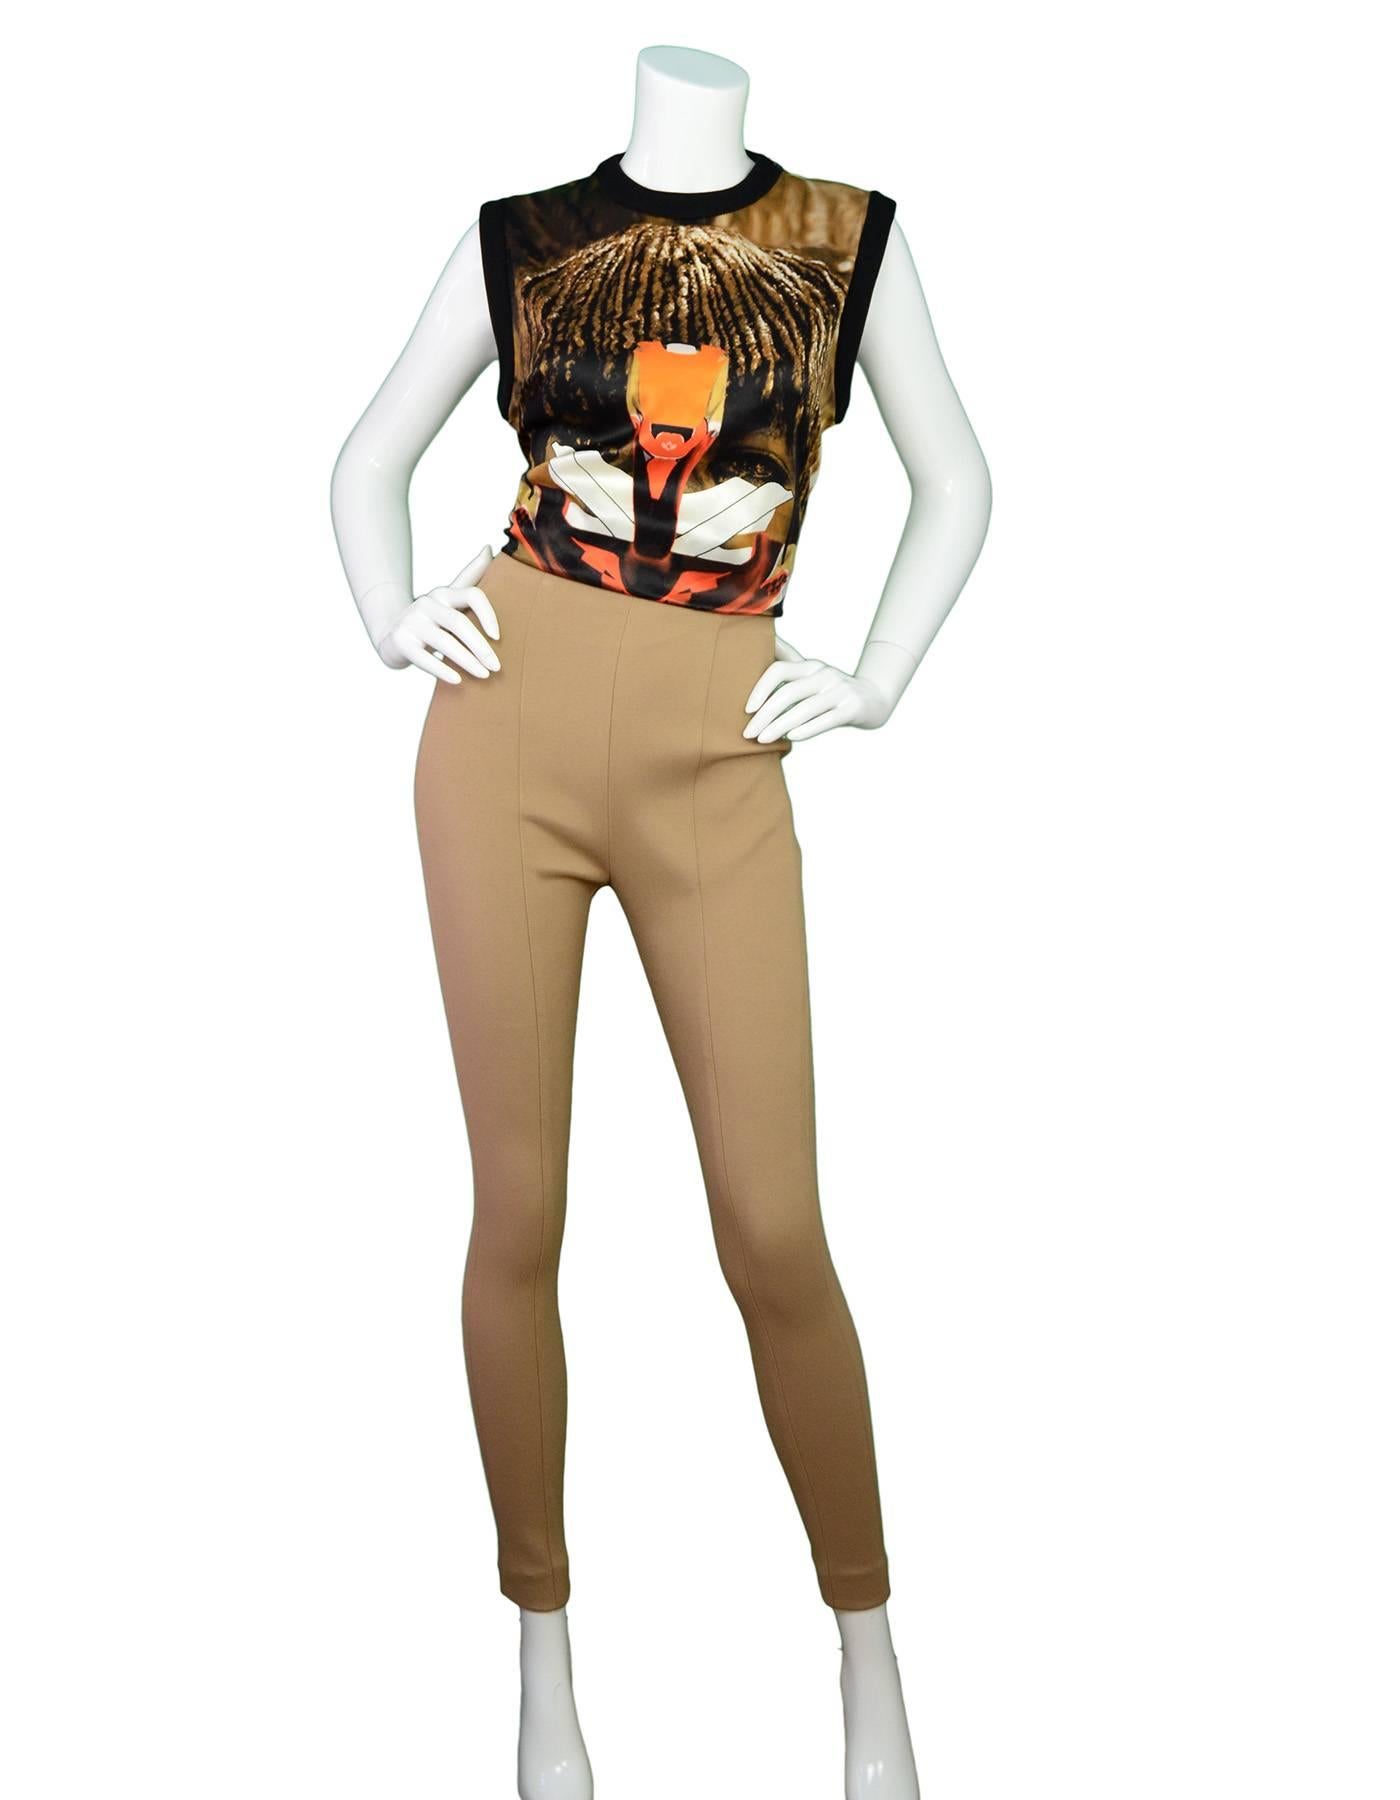 Balmain NEW Tan High Waisted Pants
Features gold exposed zipper in back

Made In: France
Color: Nude 
Composition: 96% cotton, 4% elastane
Lining: None
Closure/Opening: Back zipper closure
Exterior Pockets: None
Interior Pockets: None
Overall